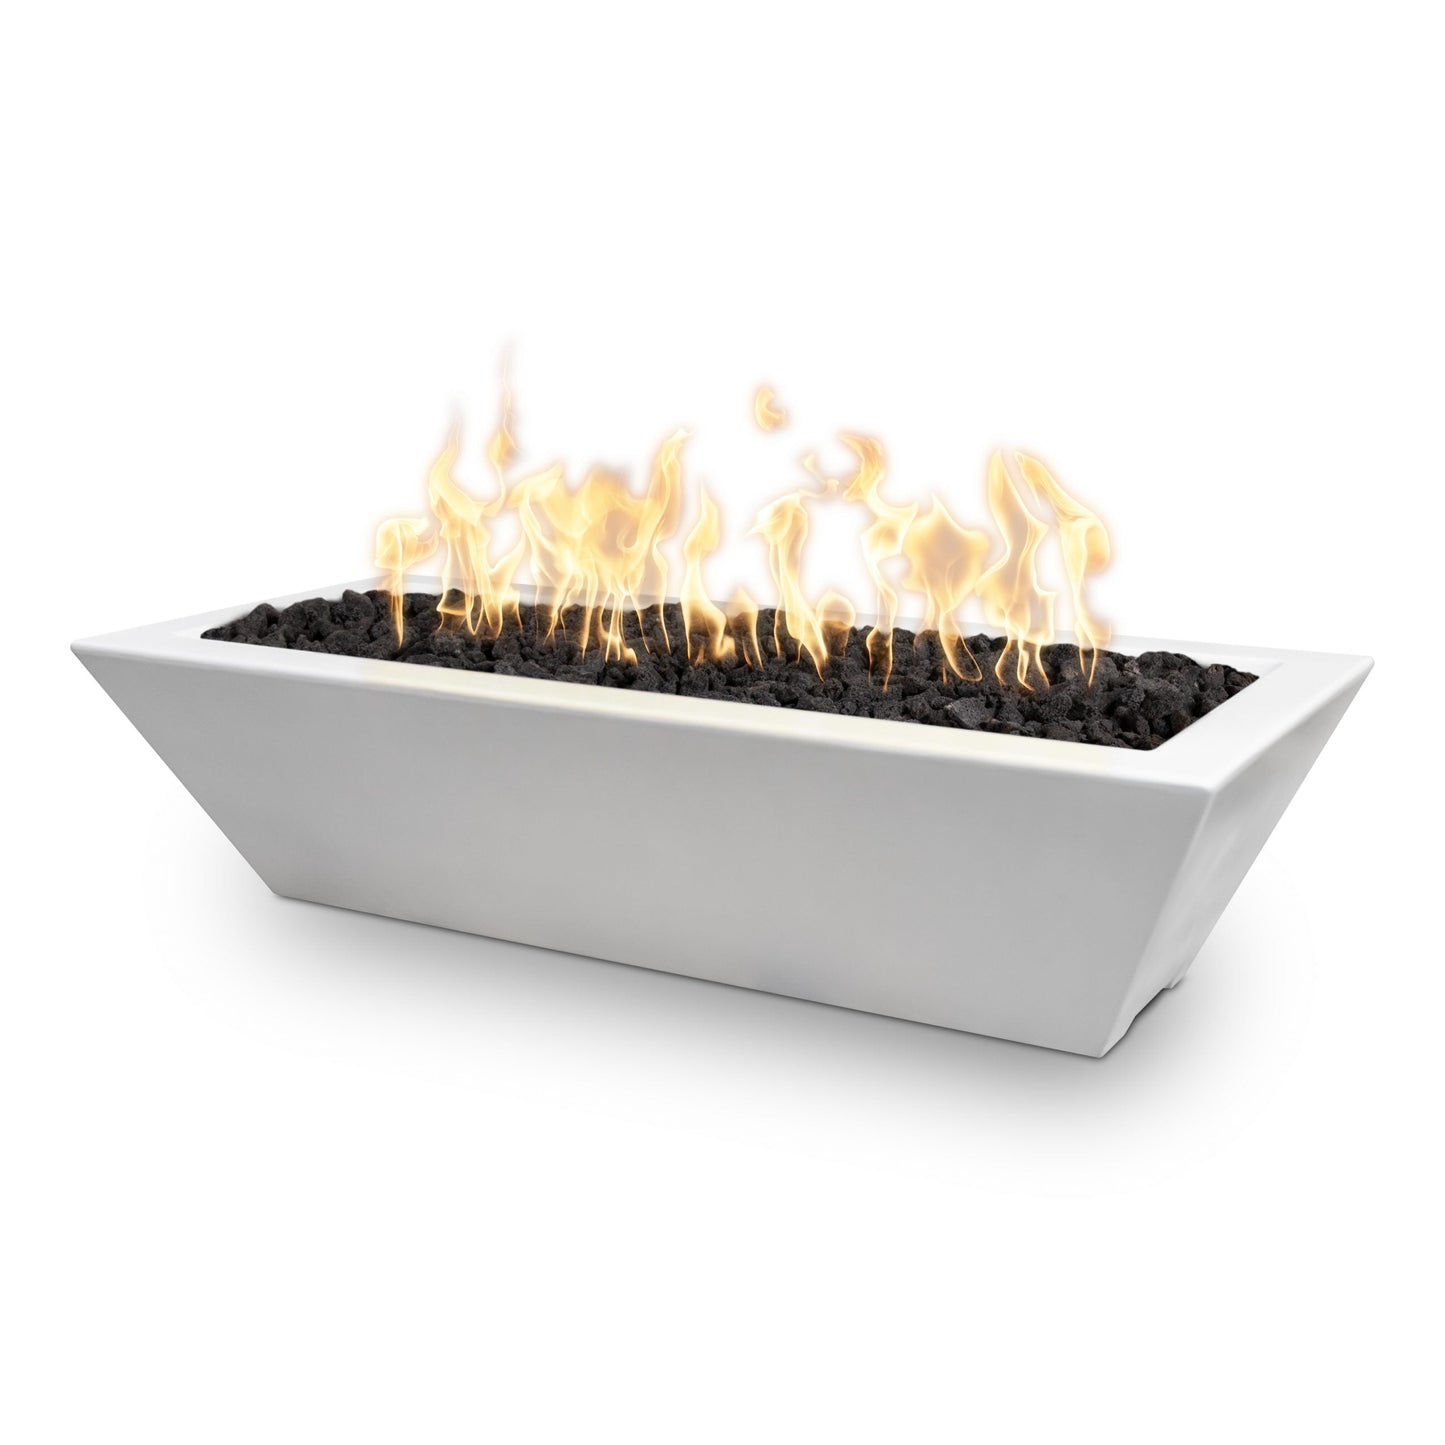 The Outdoor Plus Linear Maya 60" Ash GFRC Concrete Liquid Propane Fire Bowl with Match Lit with Flame Sense Ignition